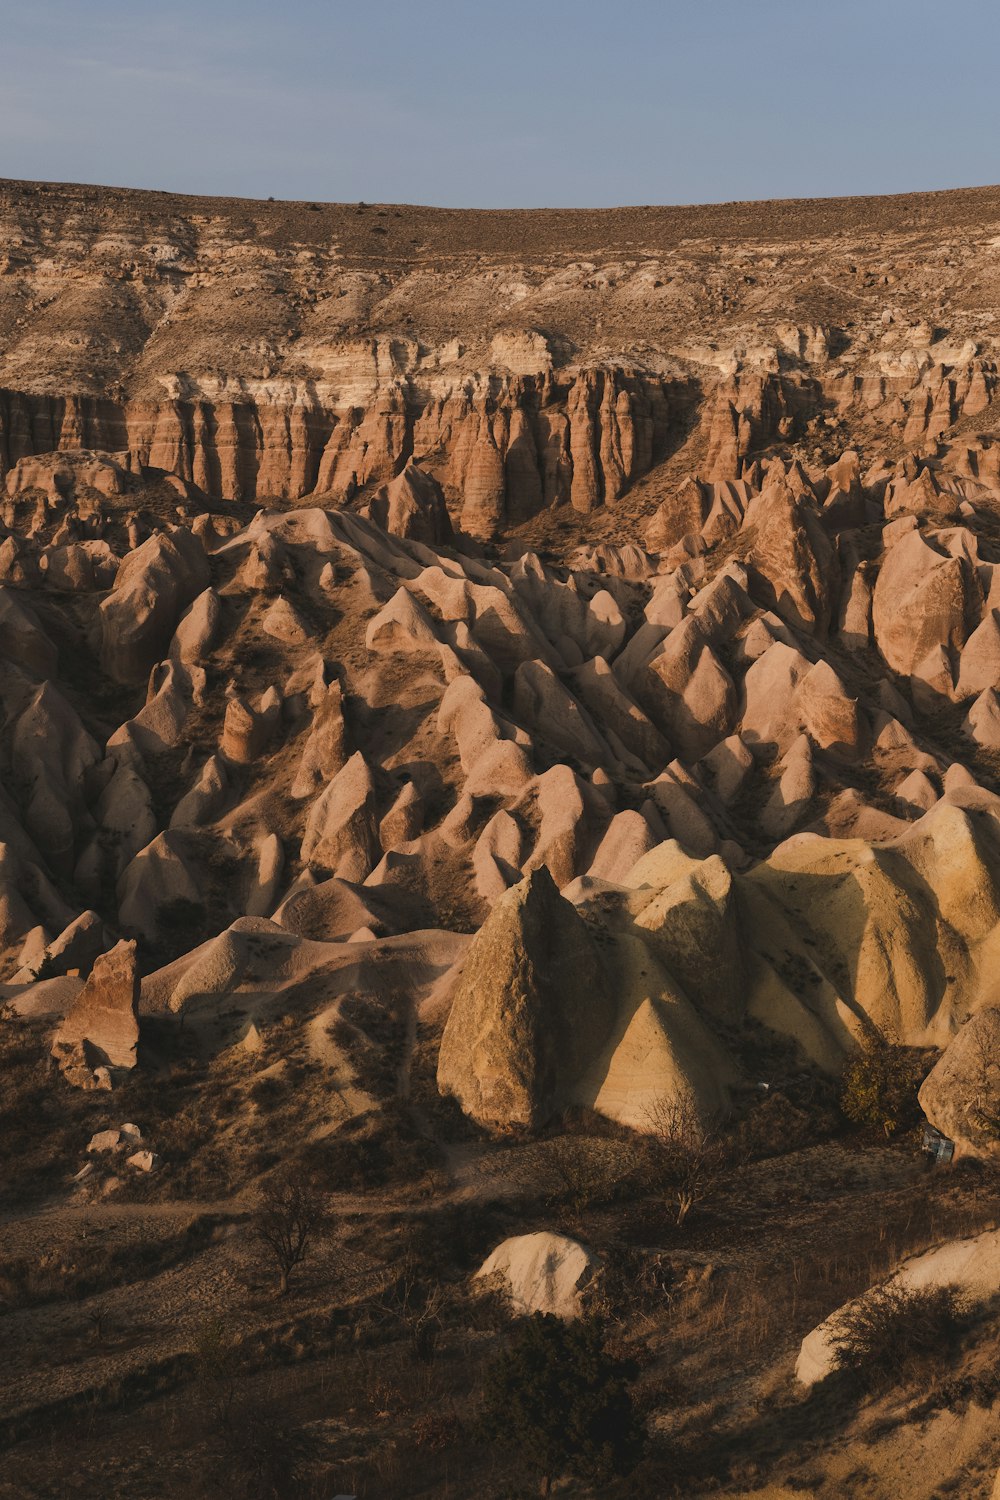 a large group of rocks in the desert